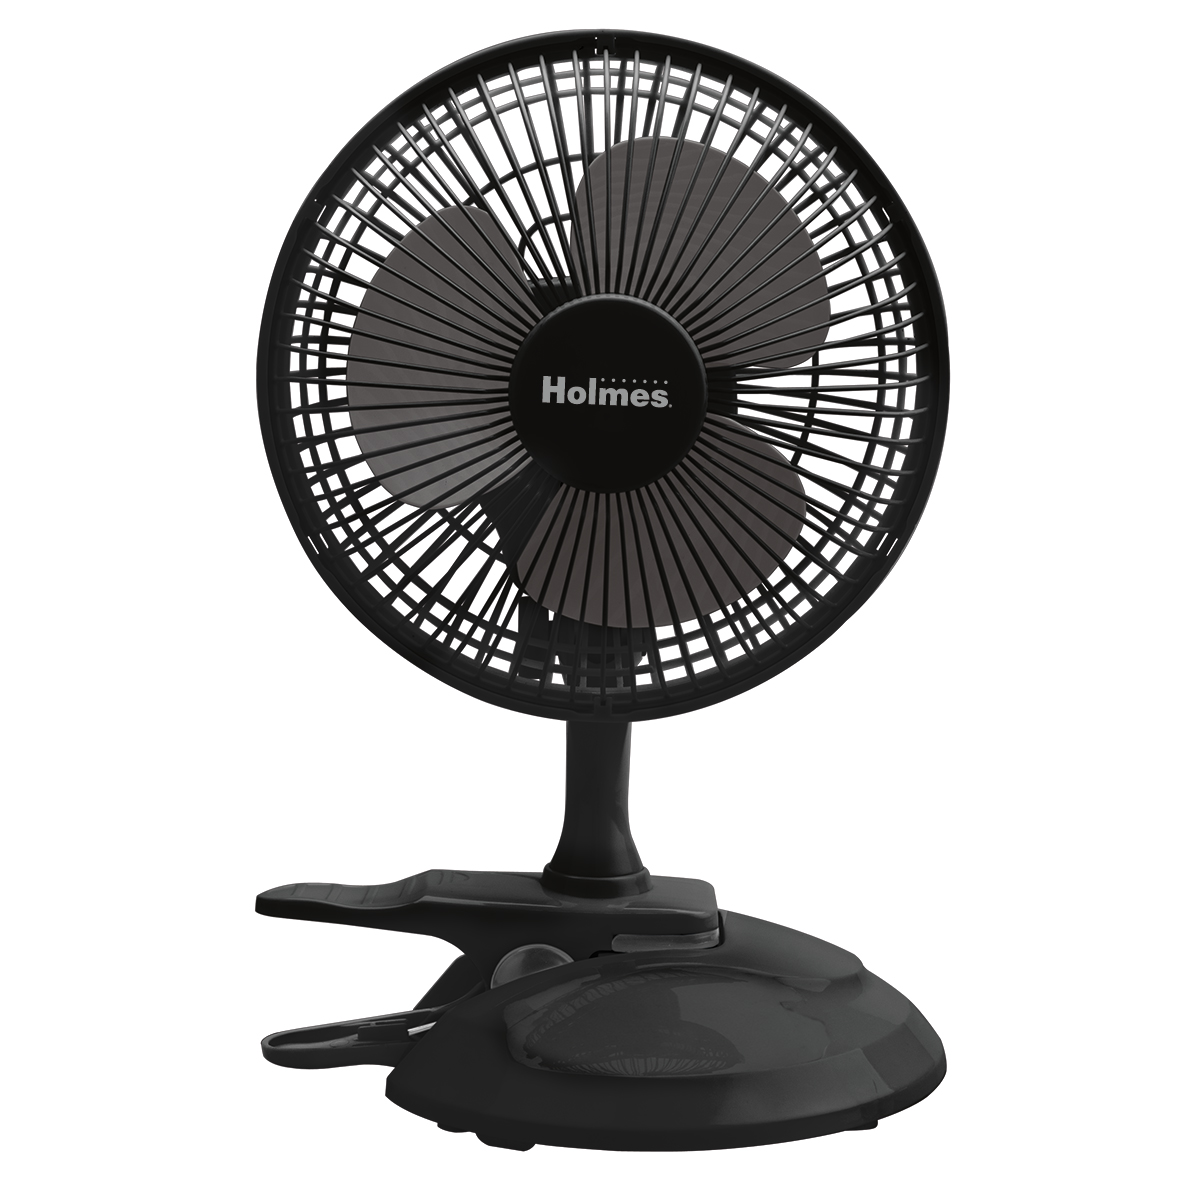 Holmes Table/Clip Convertible Fan, 6-Inch (HCF0611A-BM) - image 1 of 2